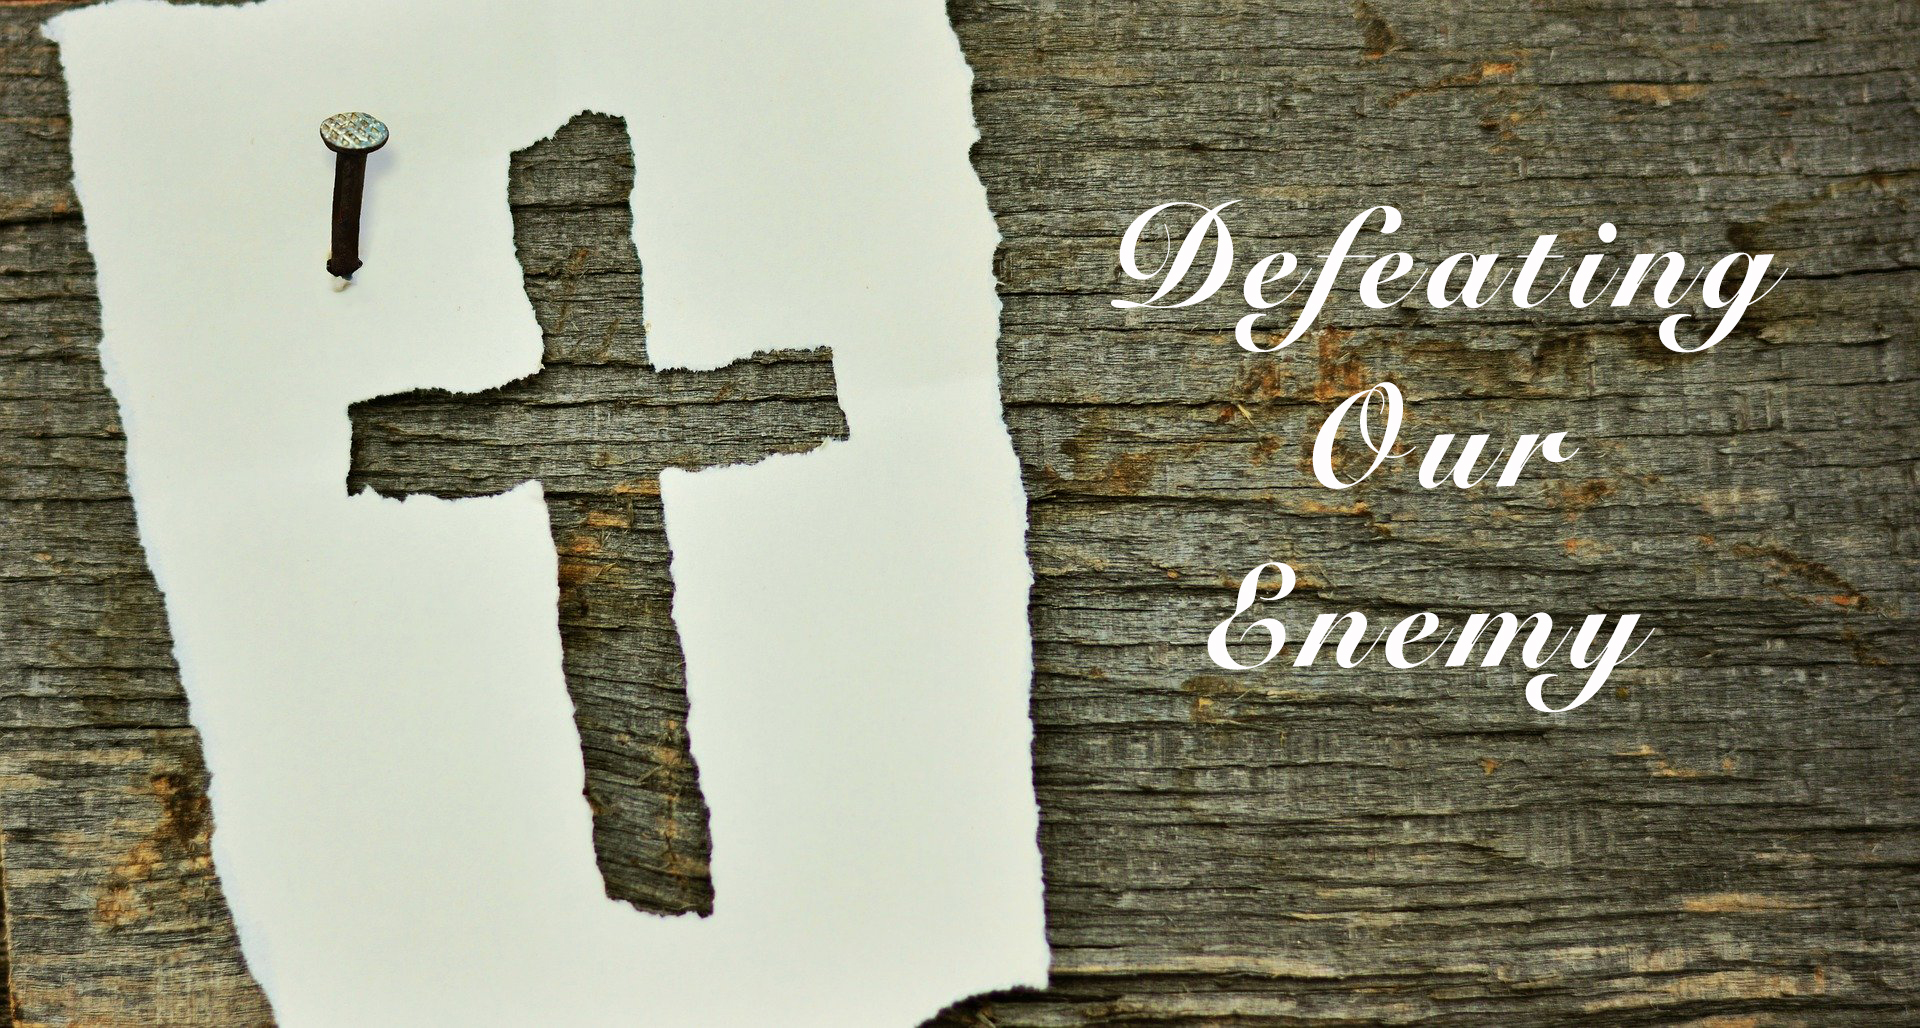 “Defeating Our Enemy”